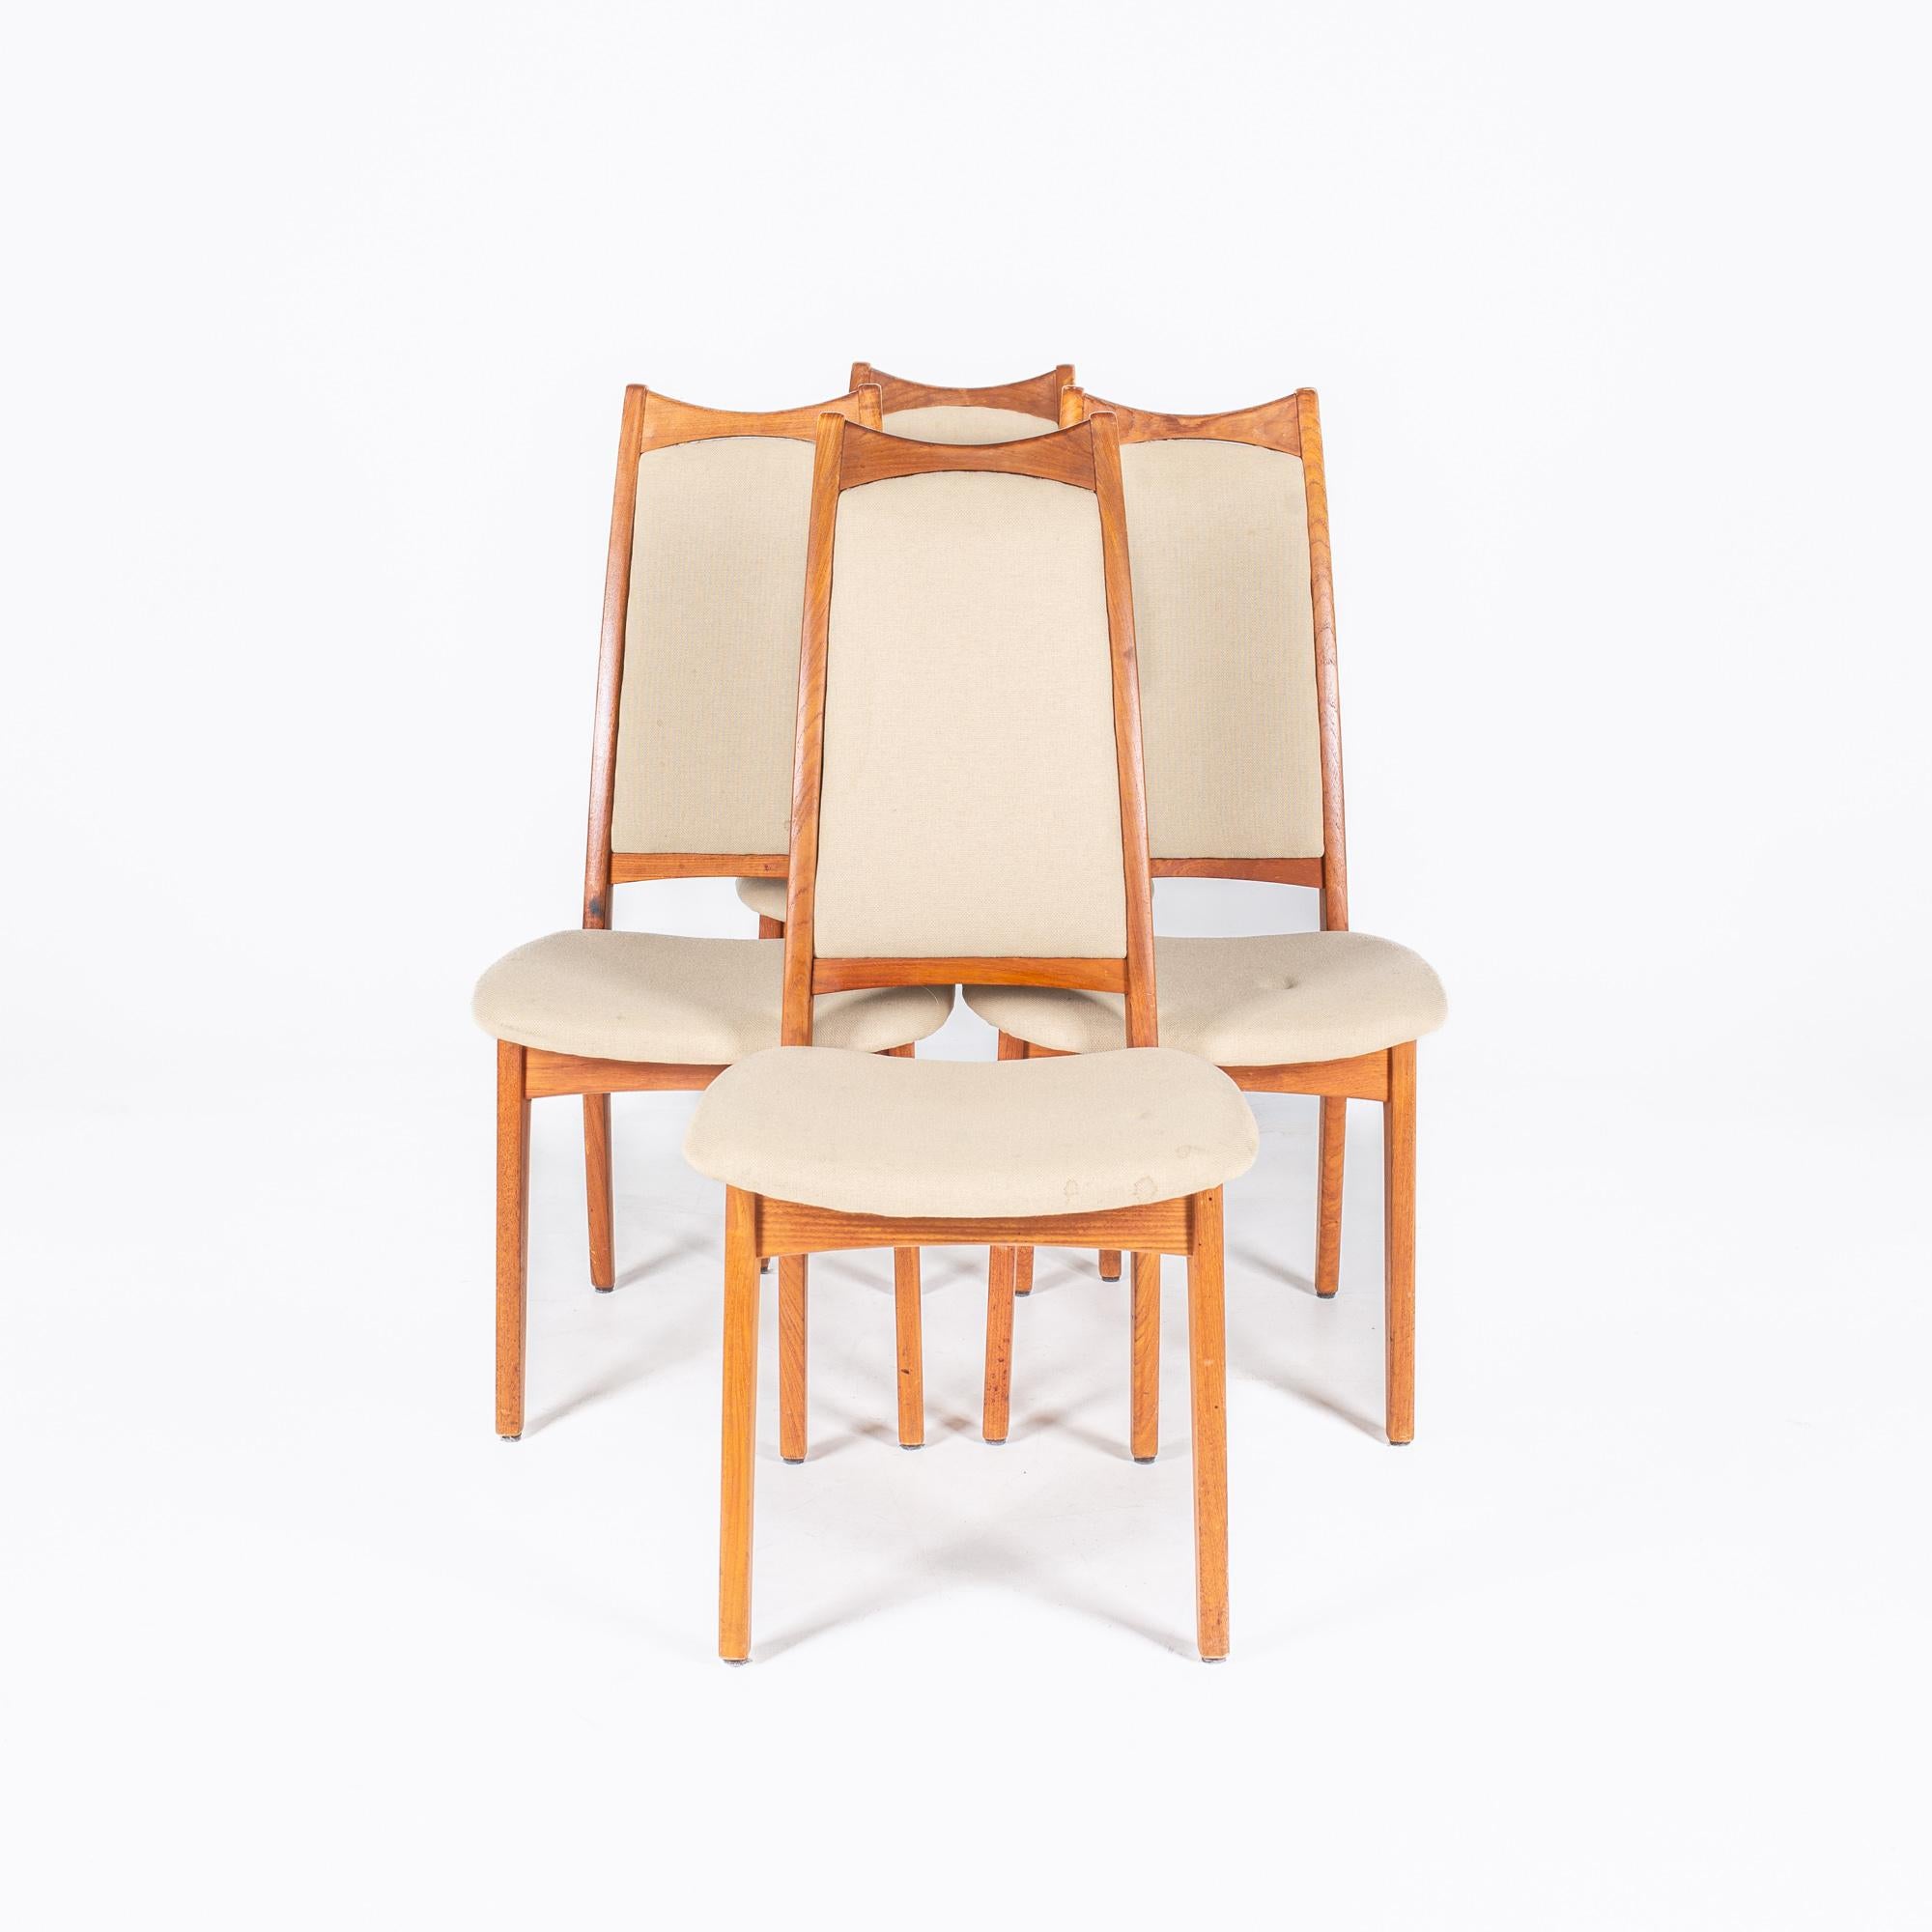 D Scan Style Mid Century High Back Teak Dining Chairs - Set of 4 

Each chair measures: 19 wide x 21.5 deep x 39.5 inches high

All pieces of furniture can be had in what we call restored vintage condition. That means the piece is restored upon